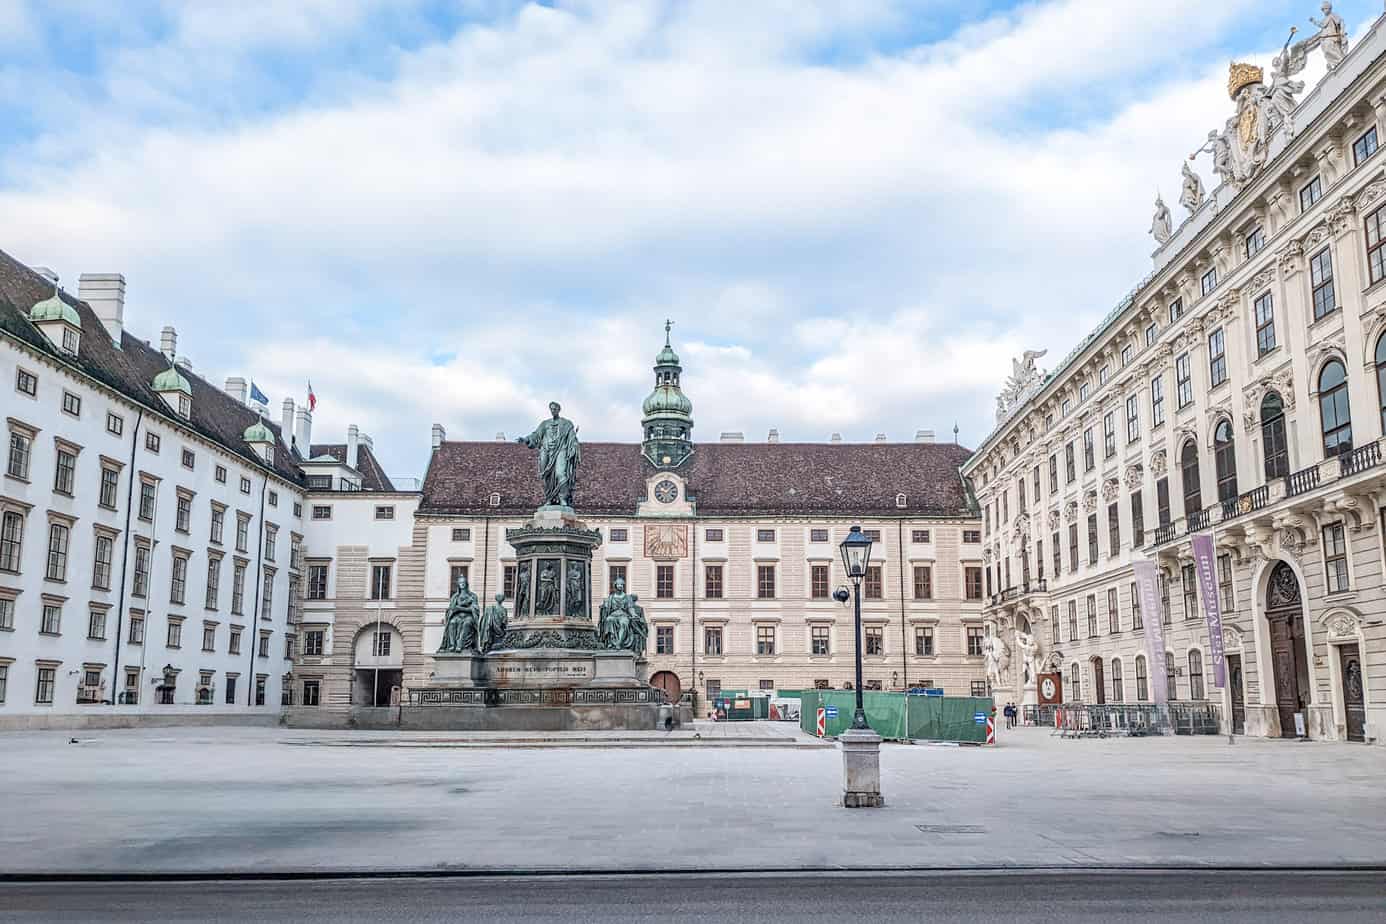 The square of the Hofburg House museums - the Sisi museum is on the right.